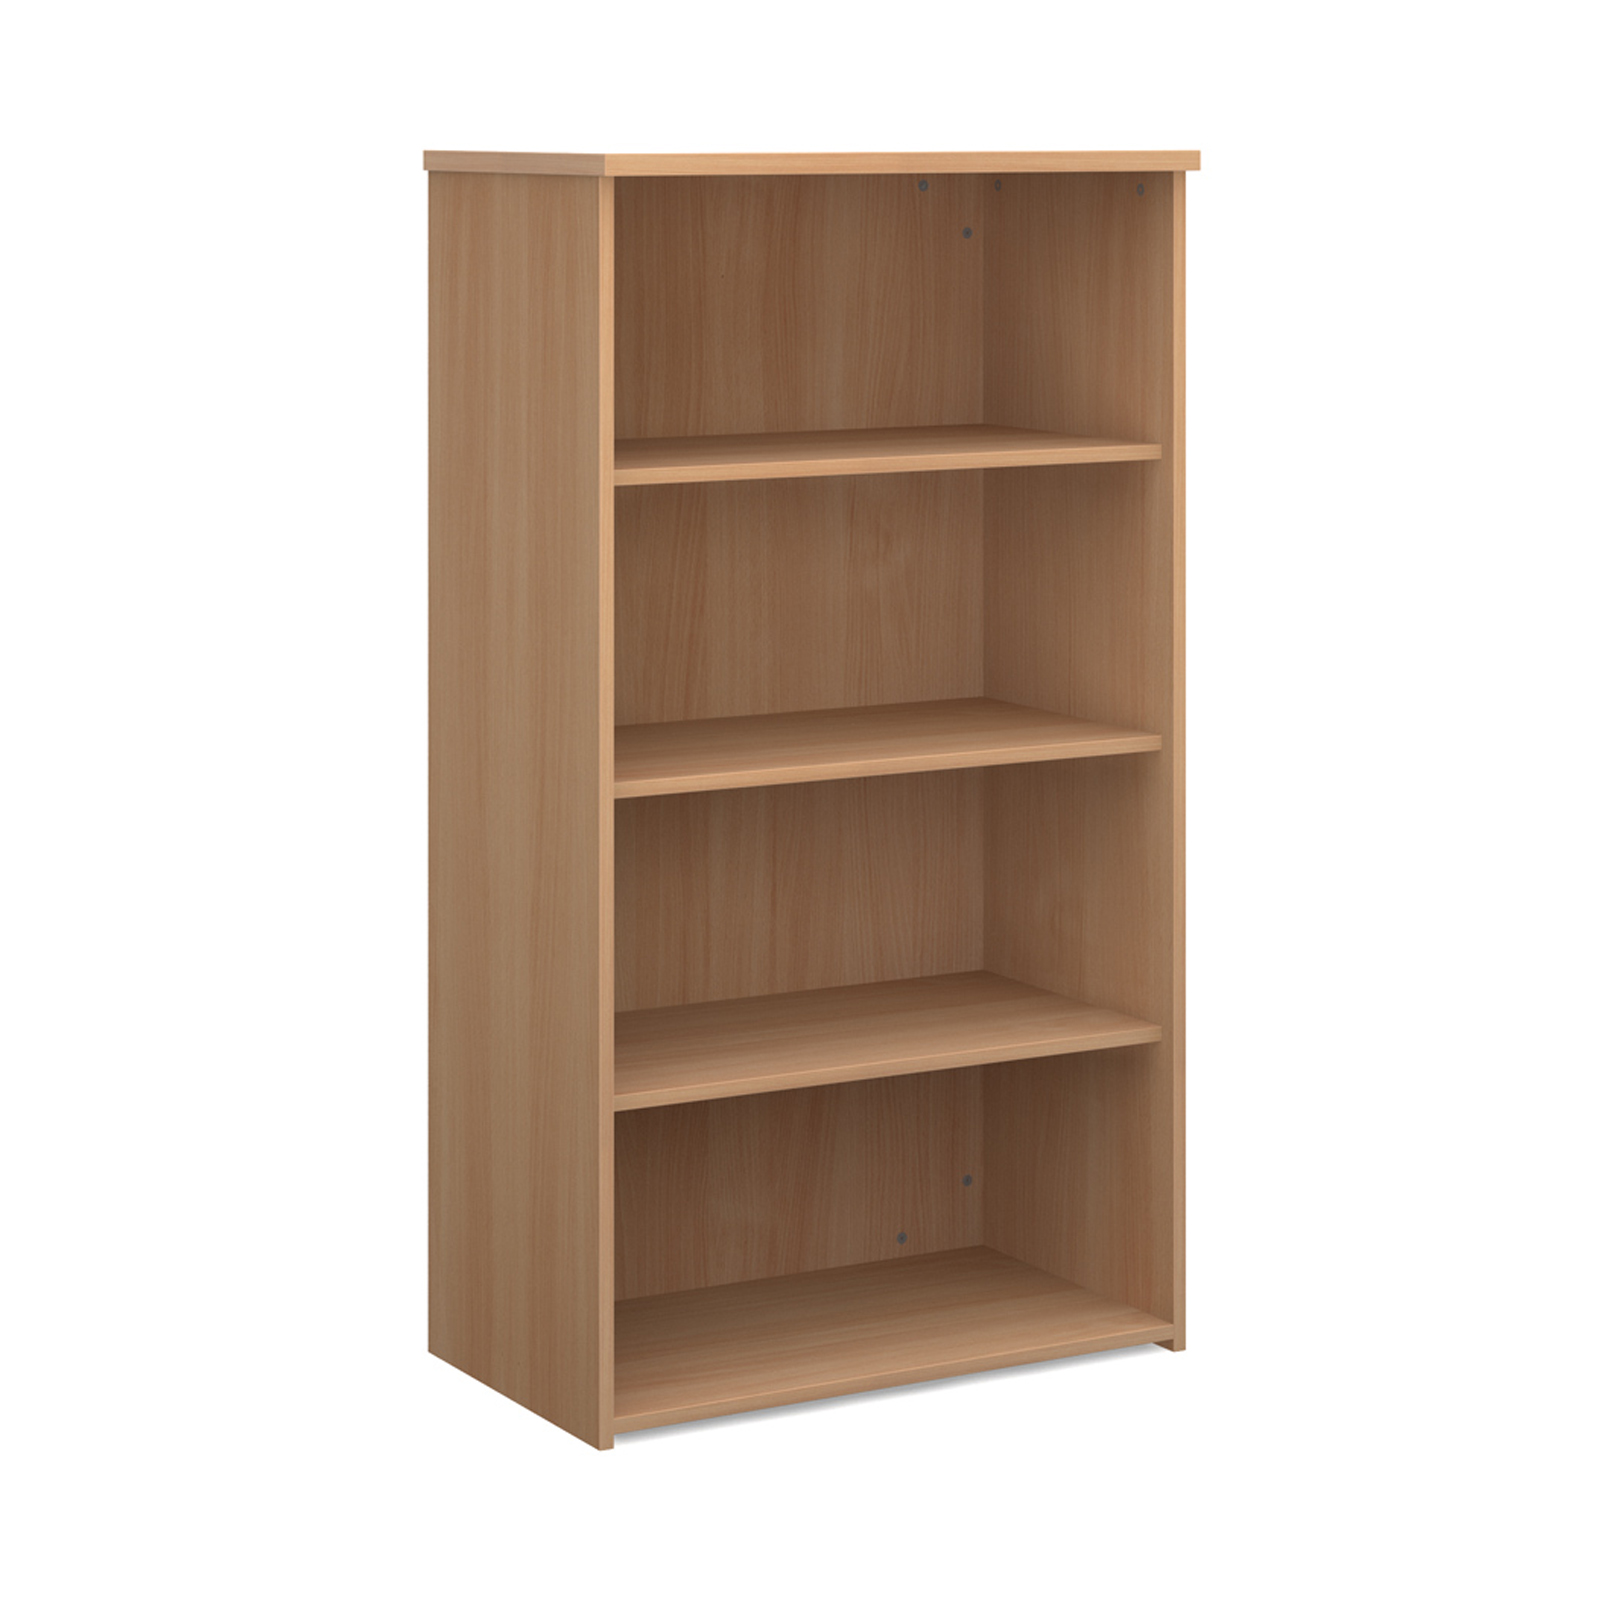 Over 1200mm High Universal bookcase 1440mm high with 3 shelves - beech